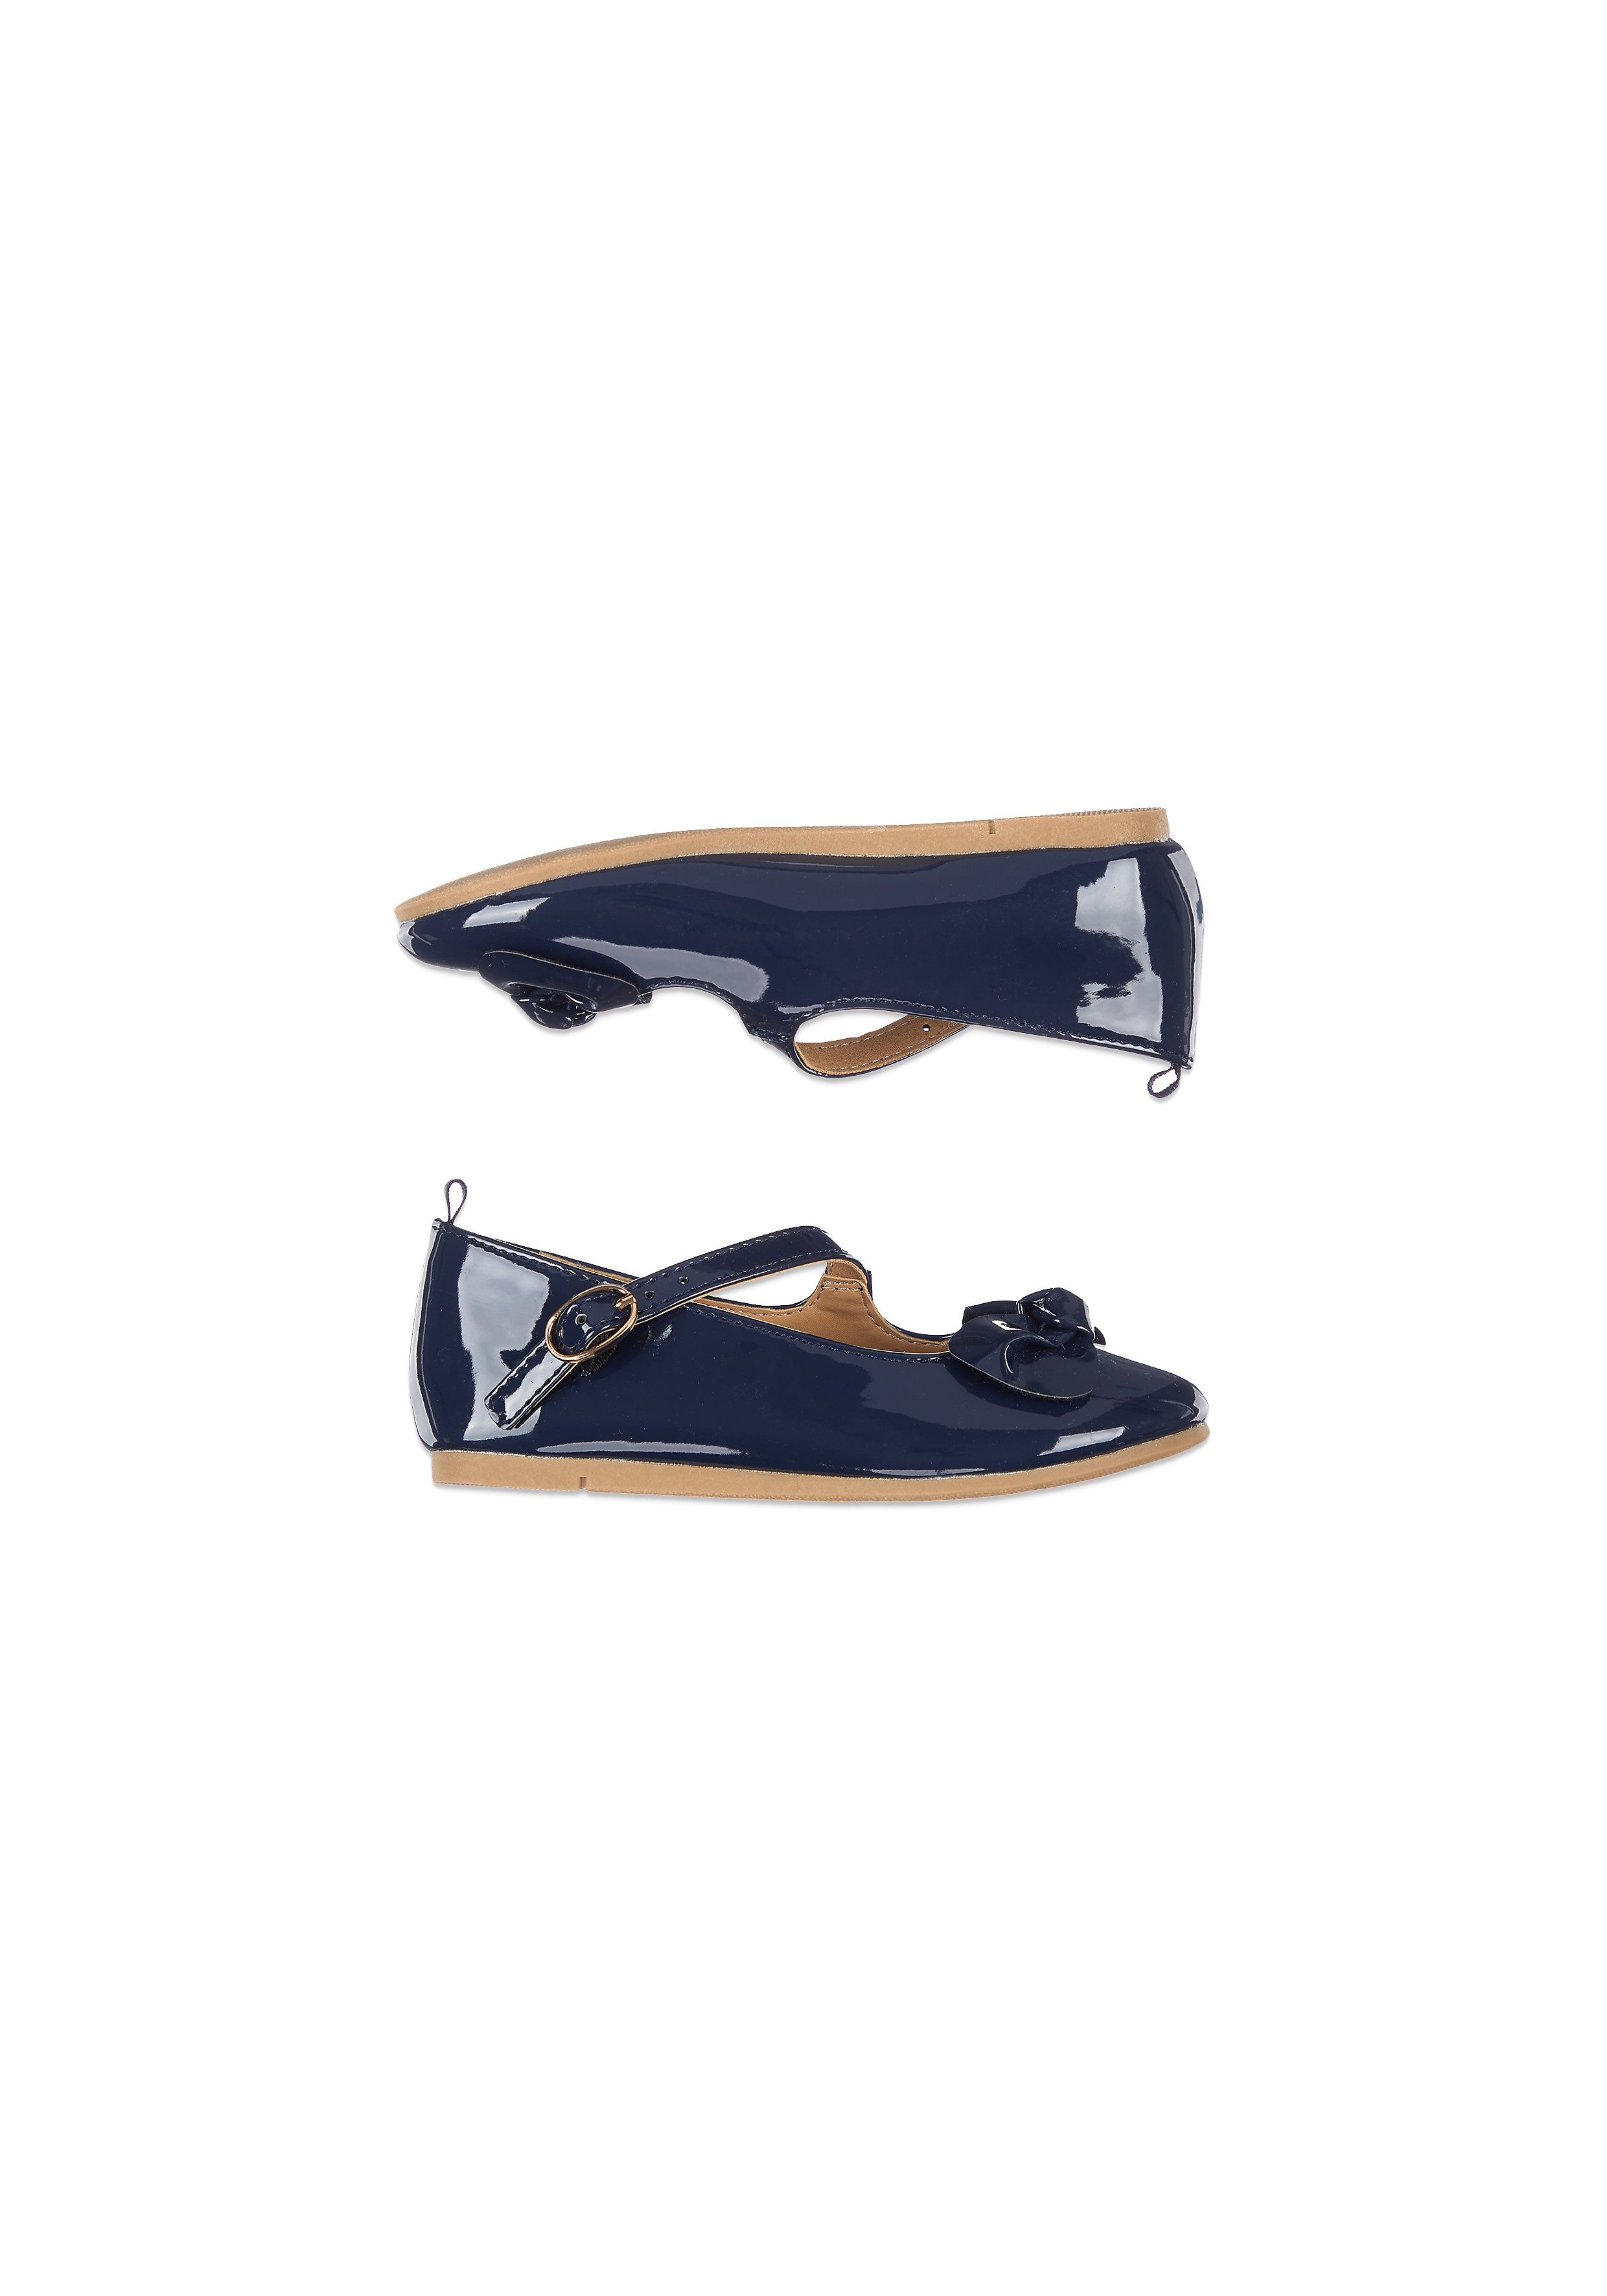 Mothercare | Girls Navy Patent Ballerina Shoes - Navy 1